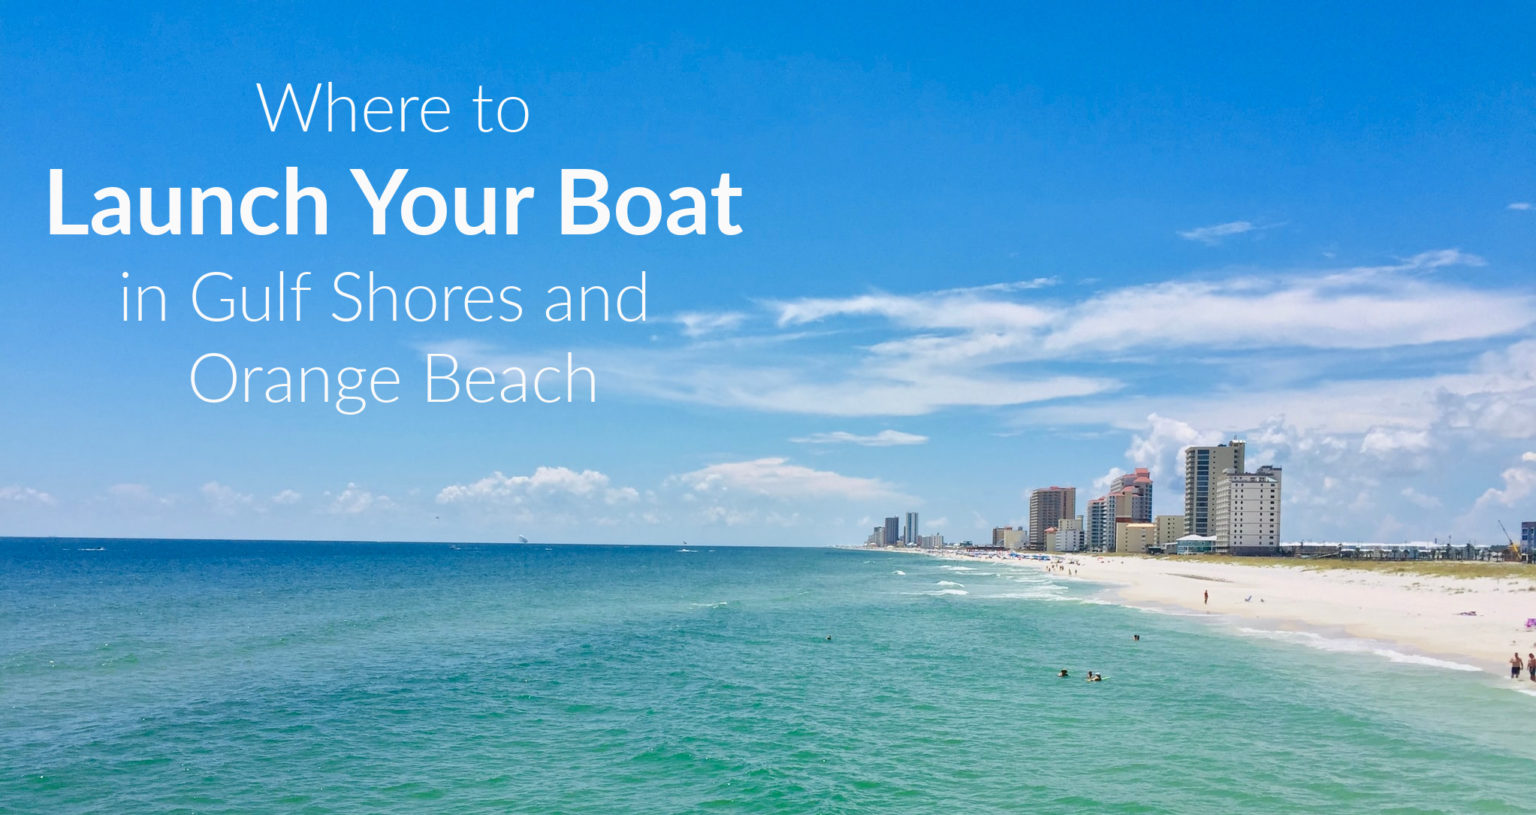 Gulf Shores and Orange Beach Boat Launches 6 Popular Gulf Shores and